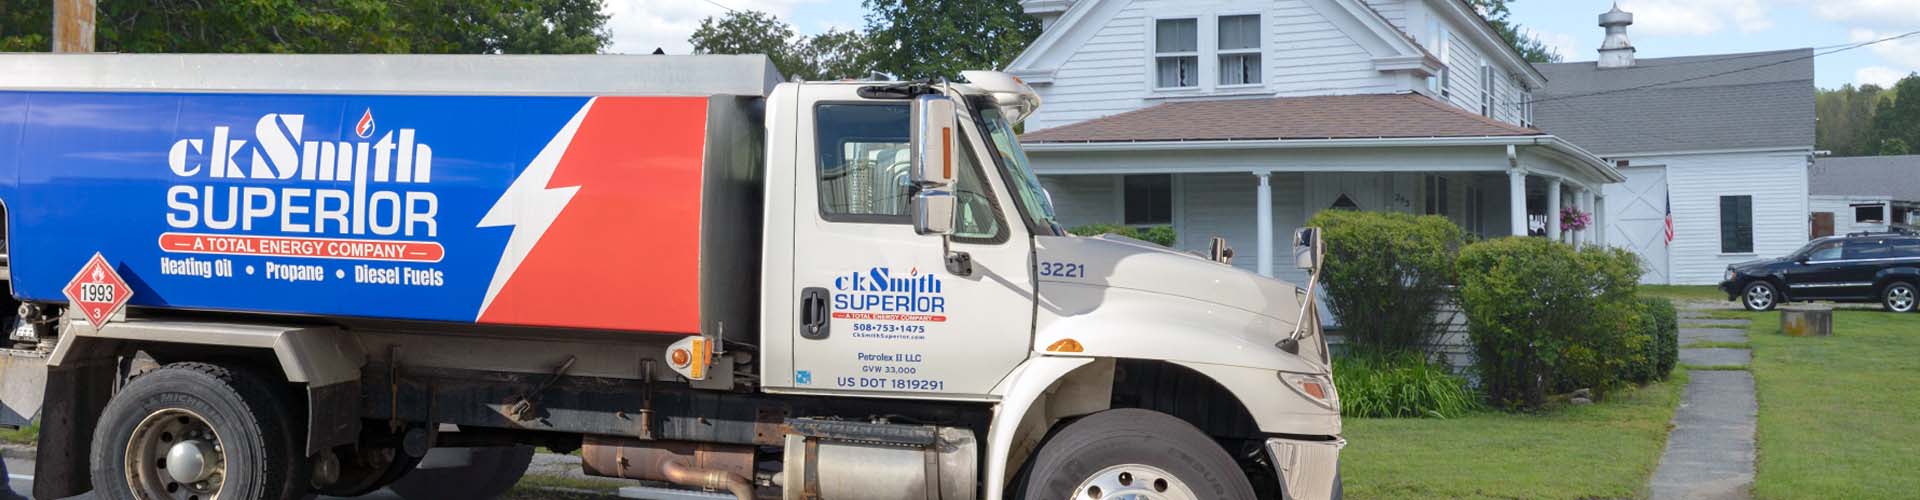 ckSmithSuperior service truck onsite at a home in Worcester or Centeral MA